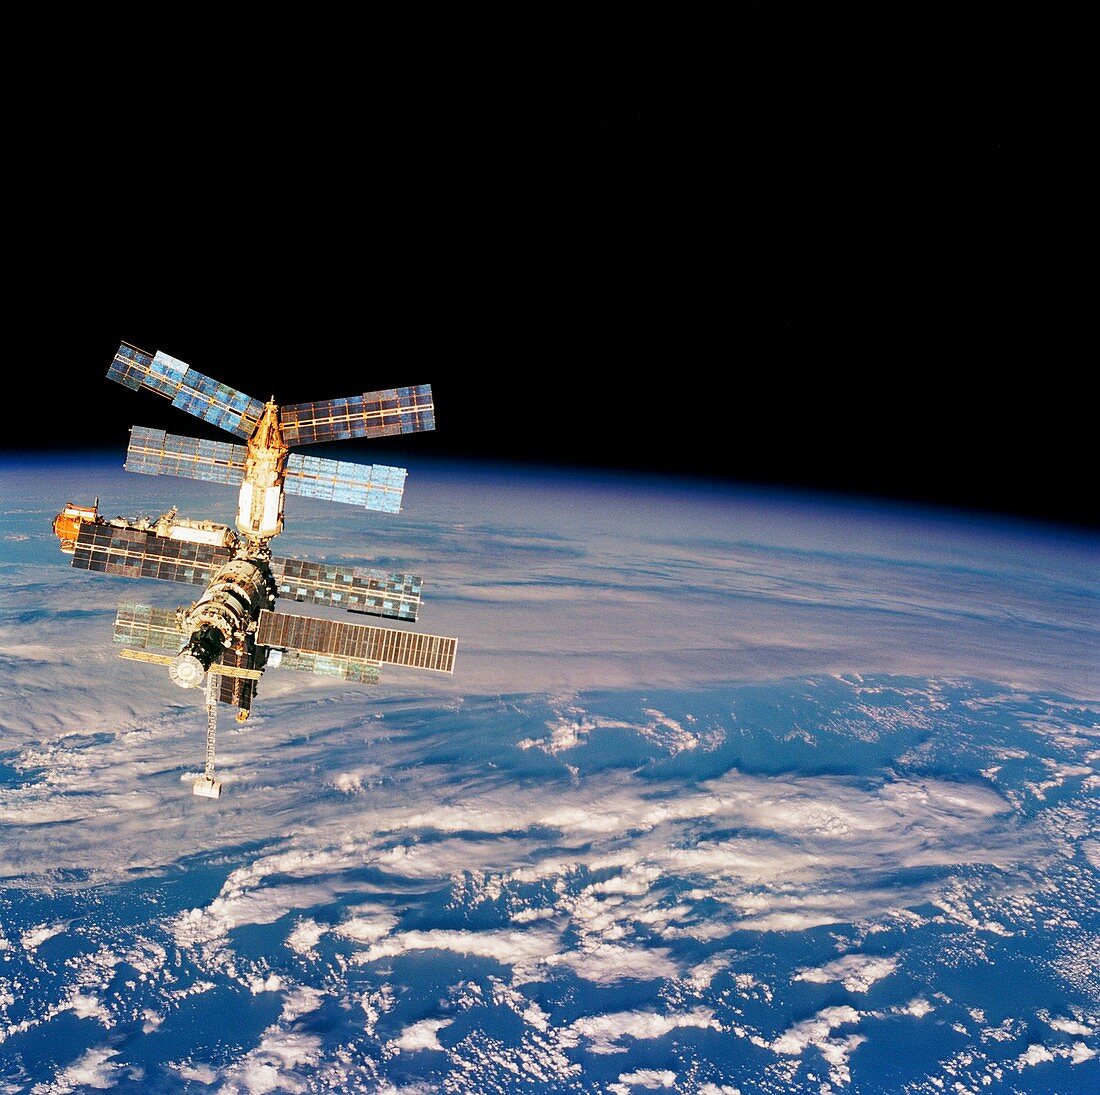 Mir Space Station from Space Shuttle